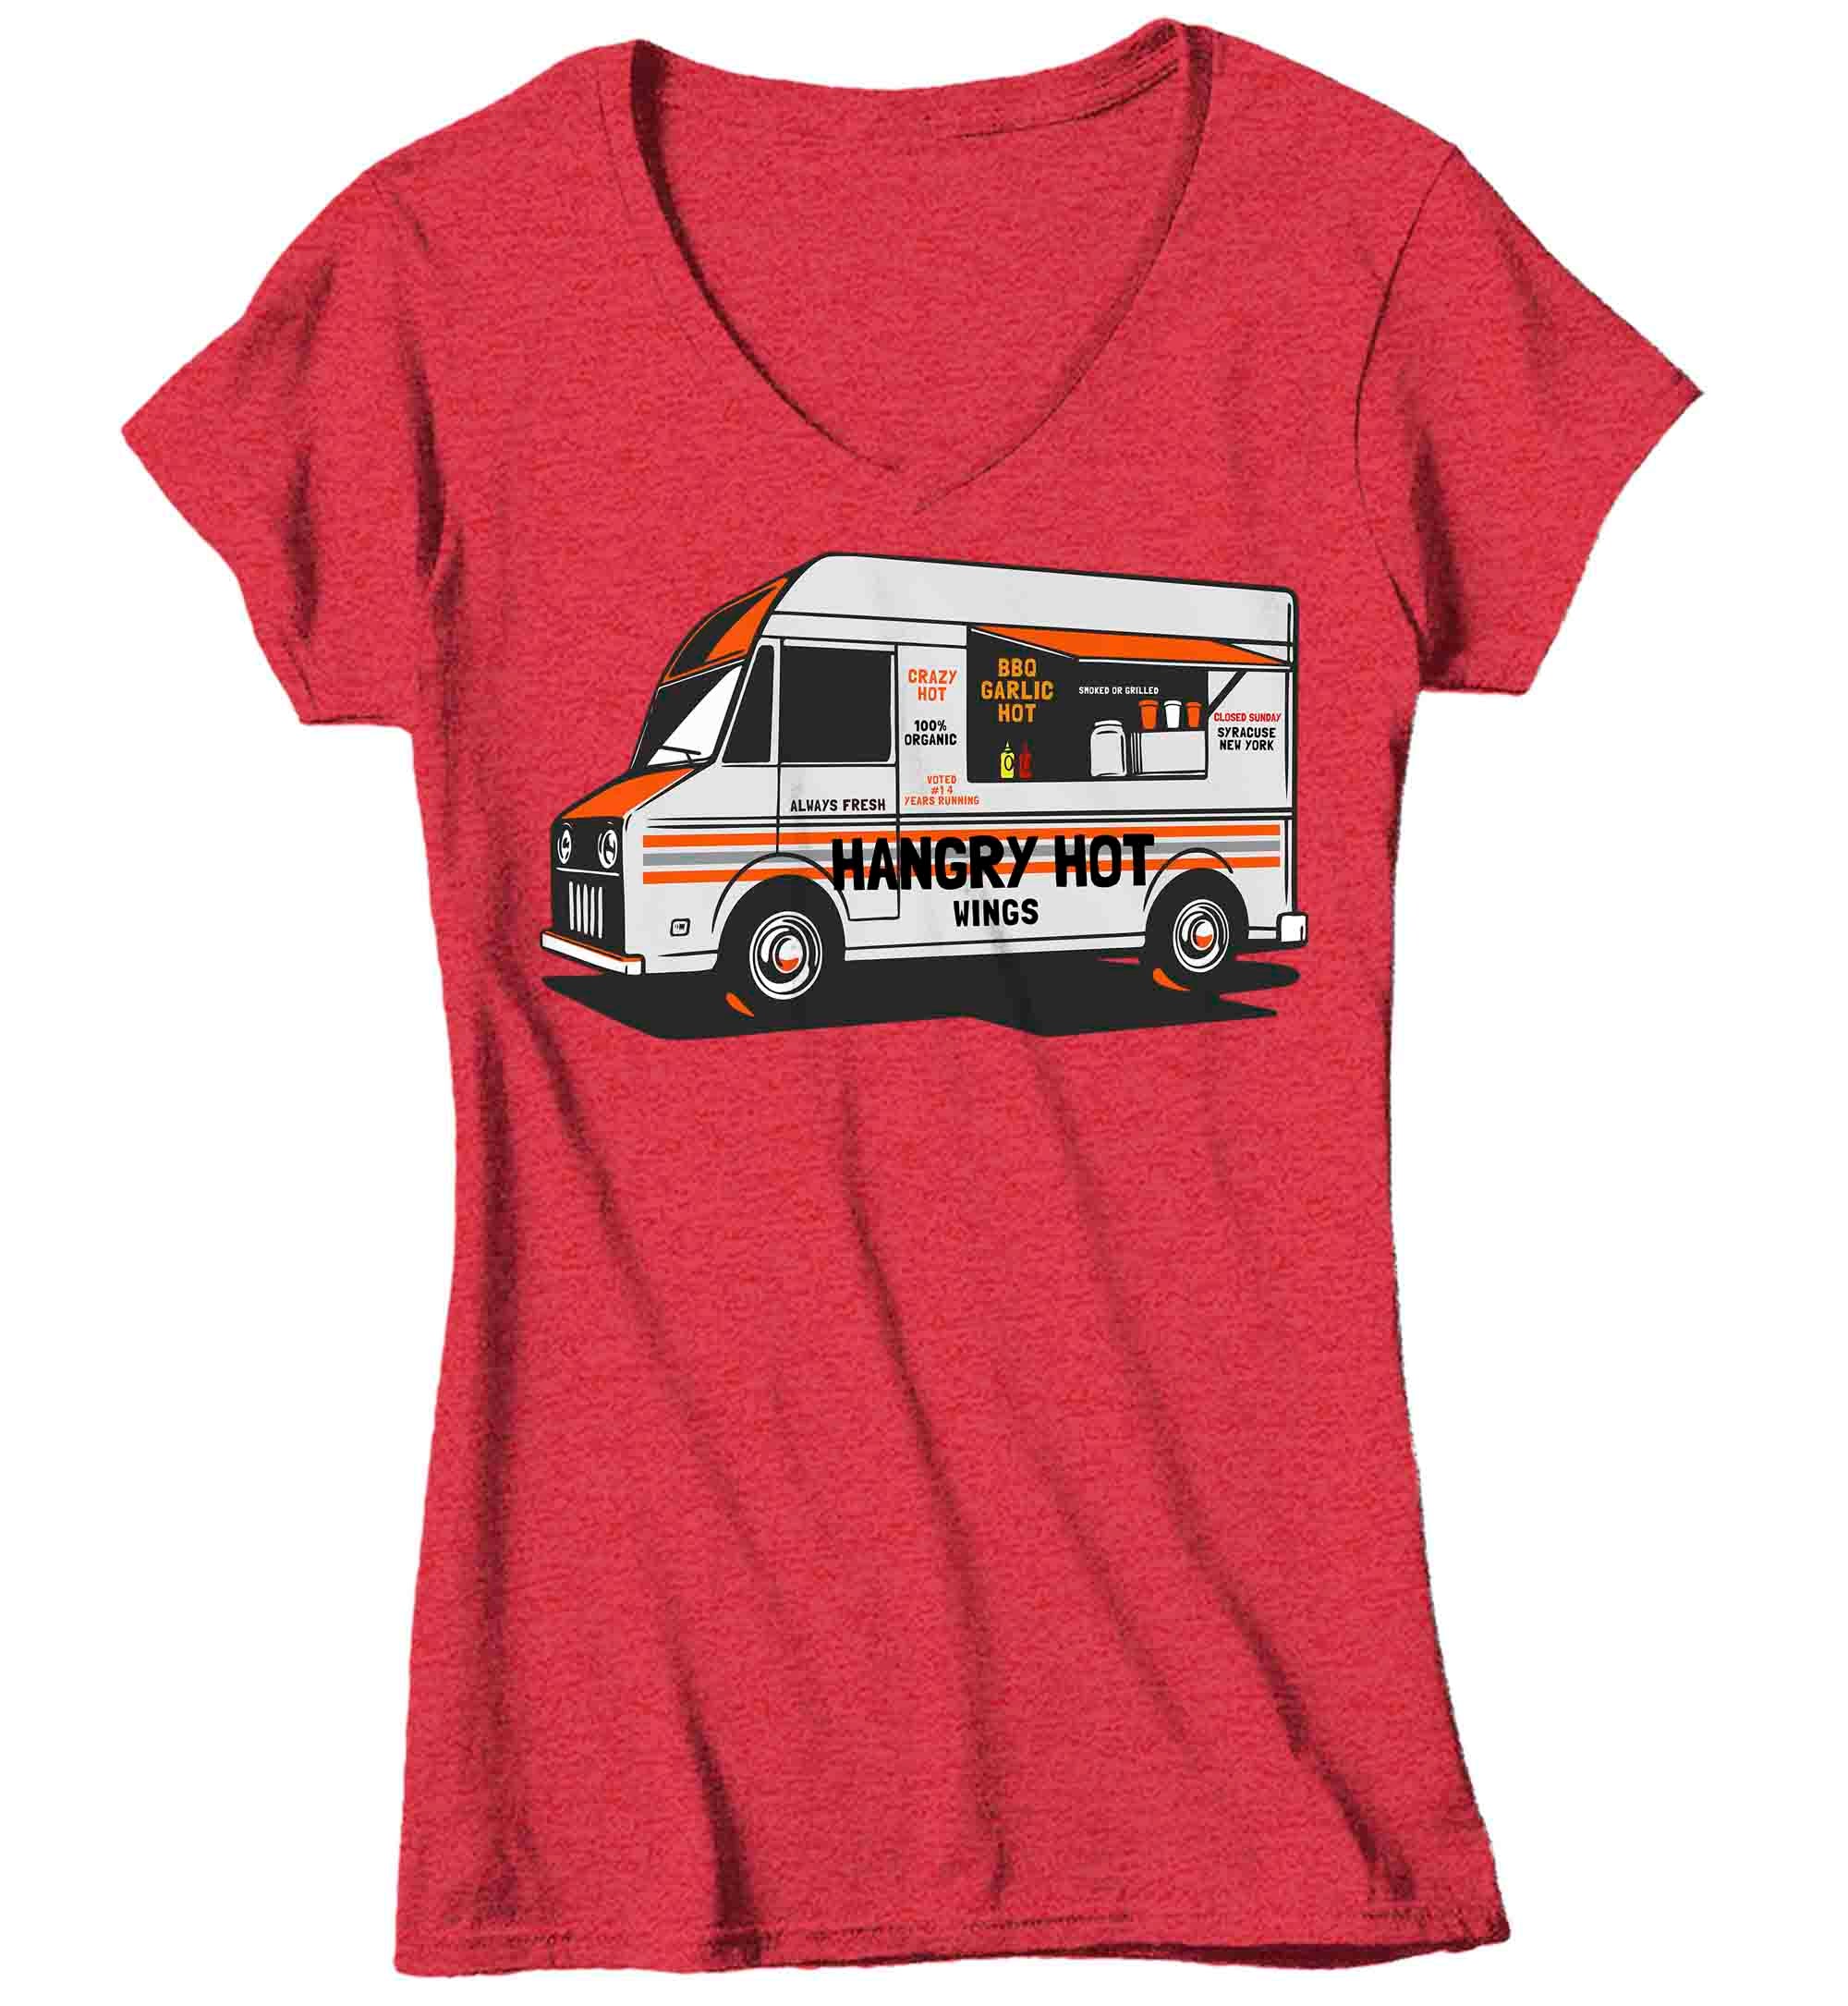 Women's V-Neck Personalized Food Truck Shirt Custom Restaurant T Shirt Cook Chef Wings Burgers G